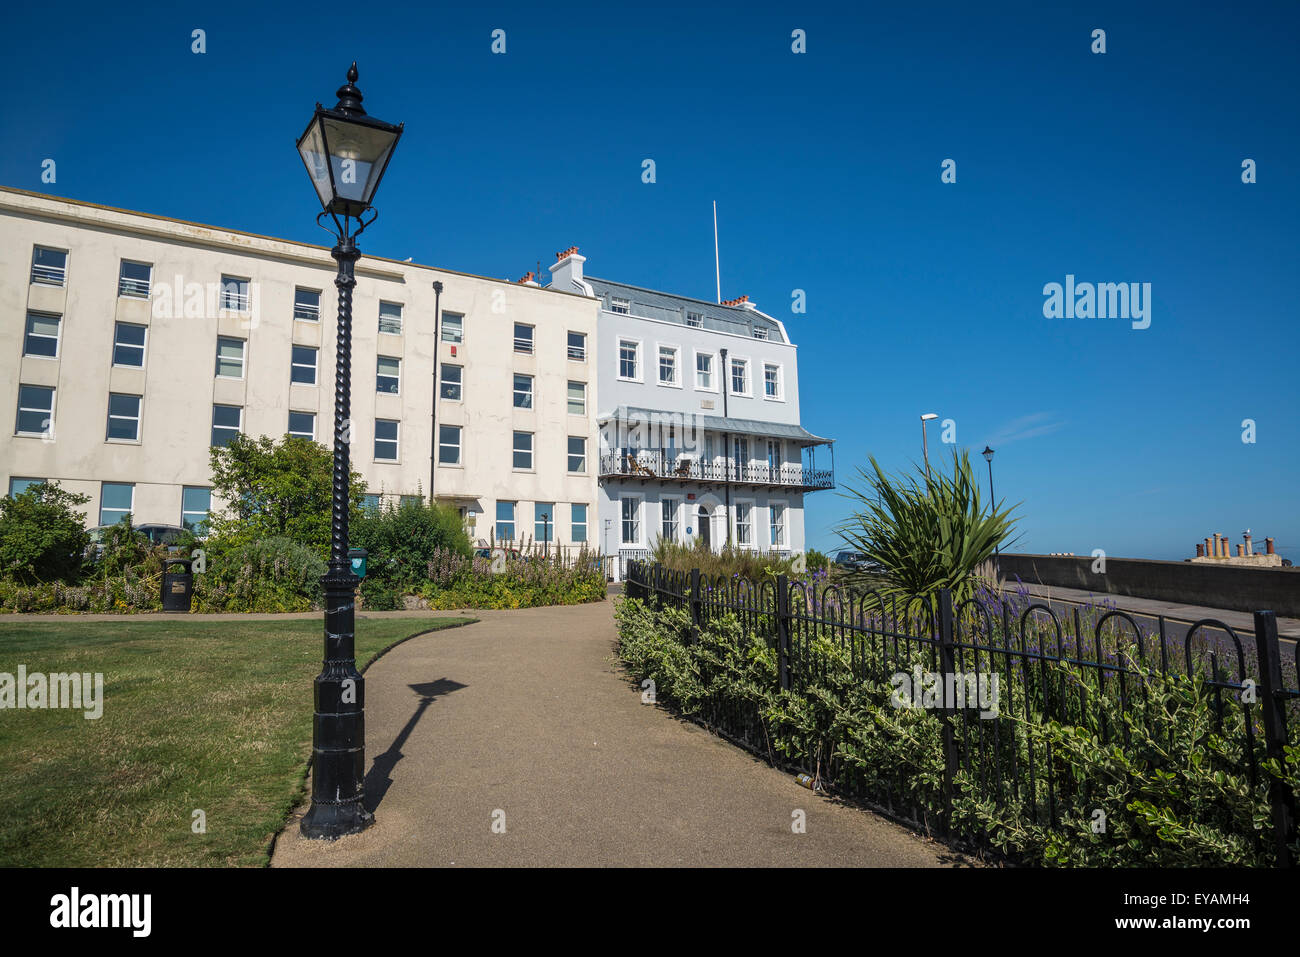 Albion Place Gardens and Albion House, Ramsgate, Kent, England, UK Stock Photo